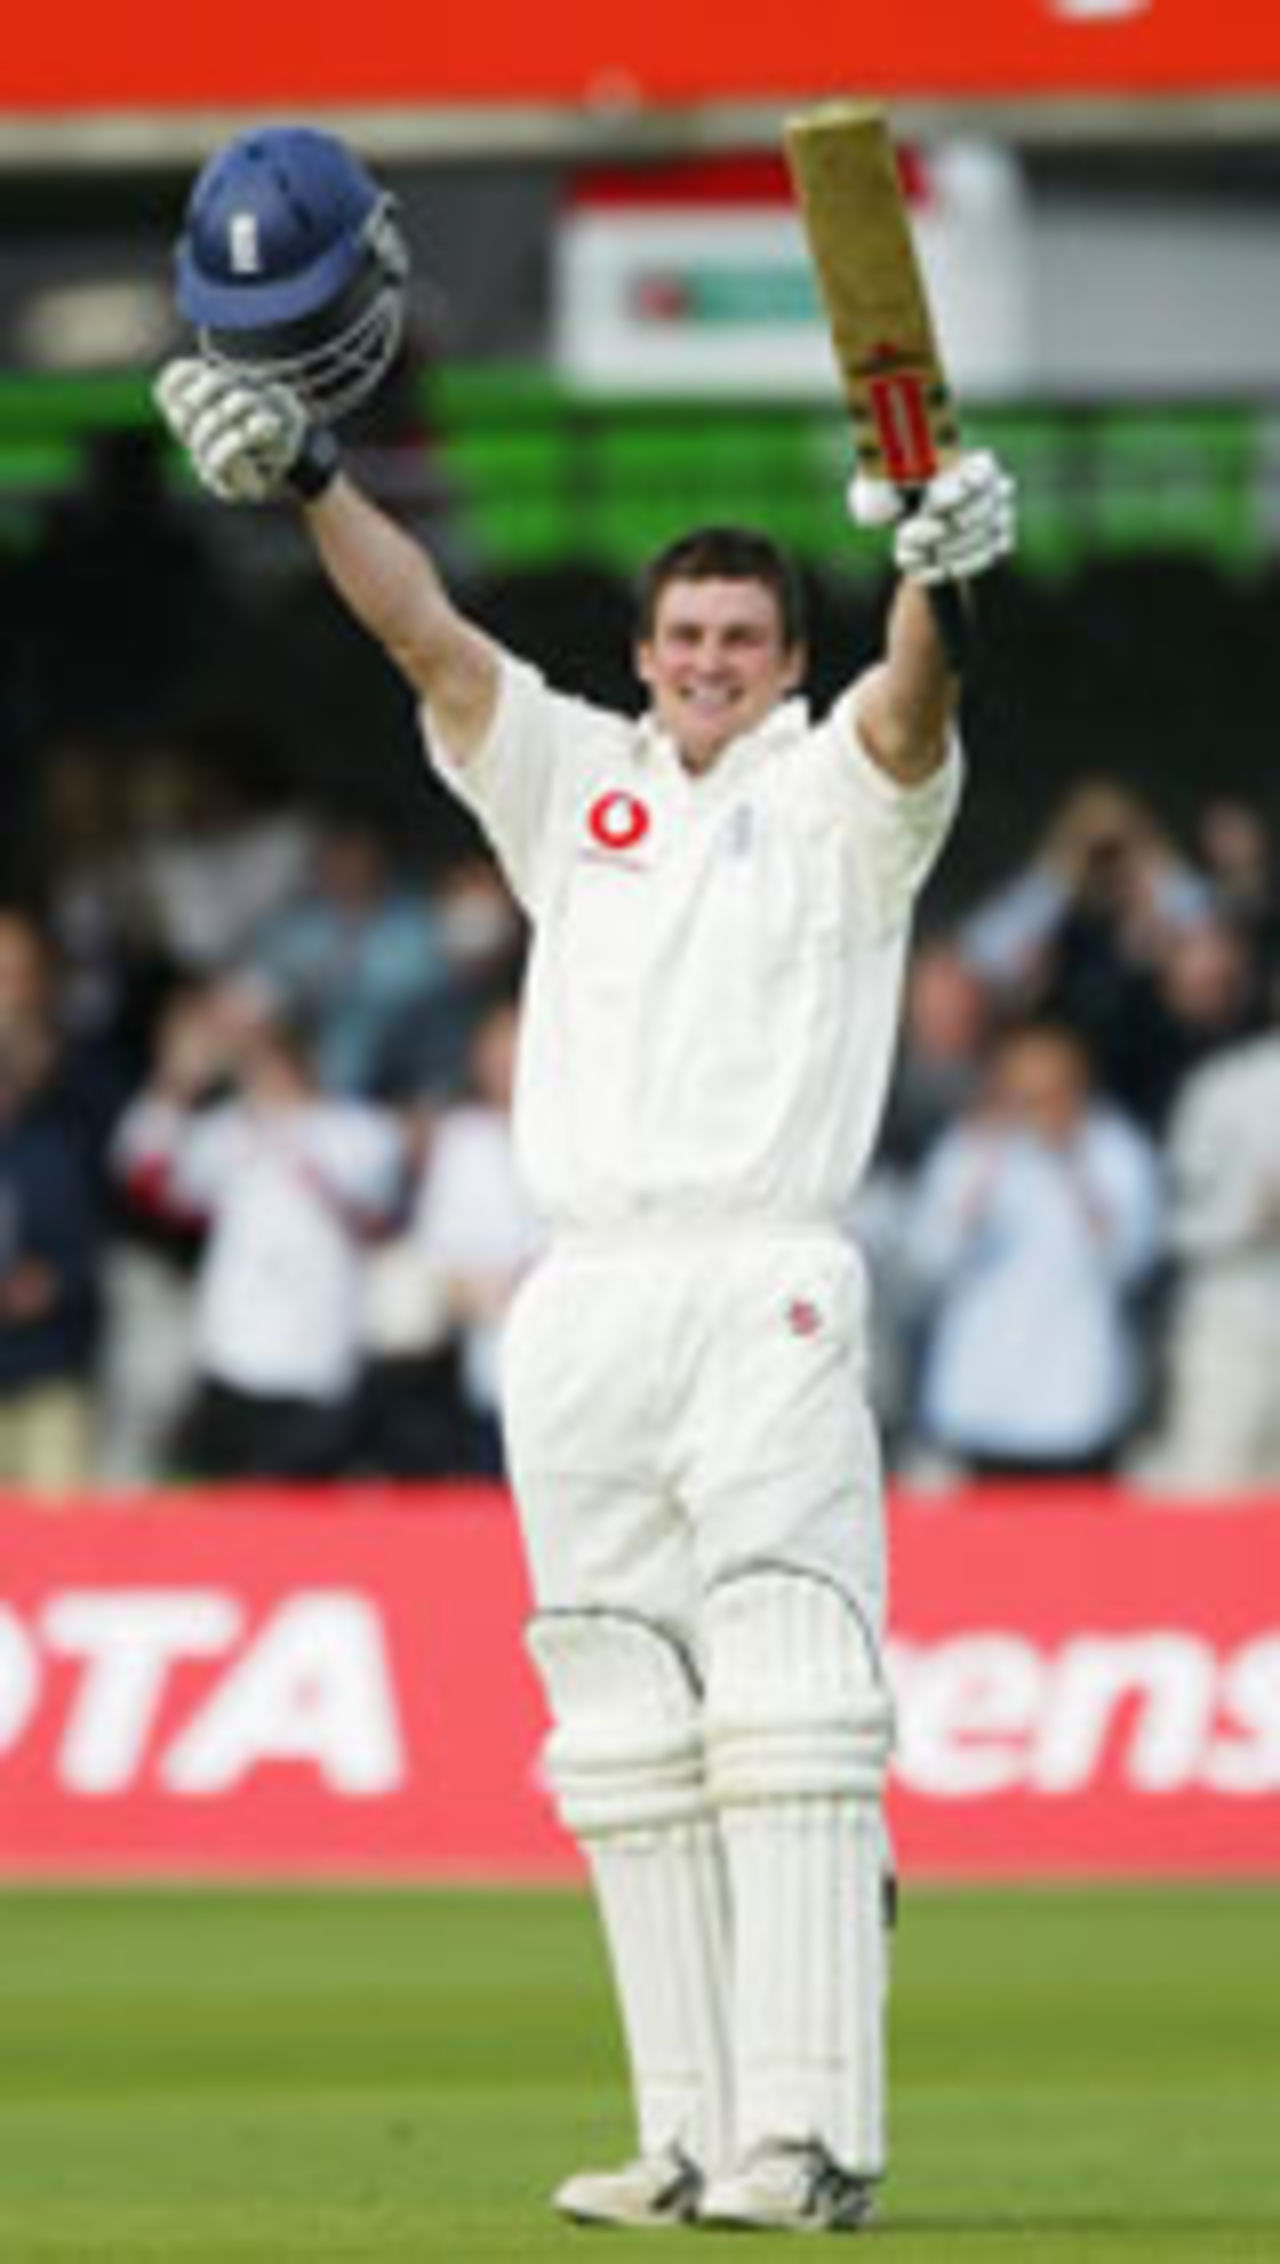 Andrew Strauss celebrates his debut Test century, England v New Zealand, 1st Test, Lord's, May 21, 2004